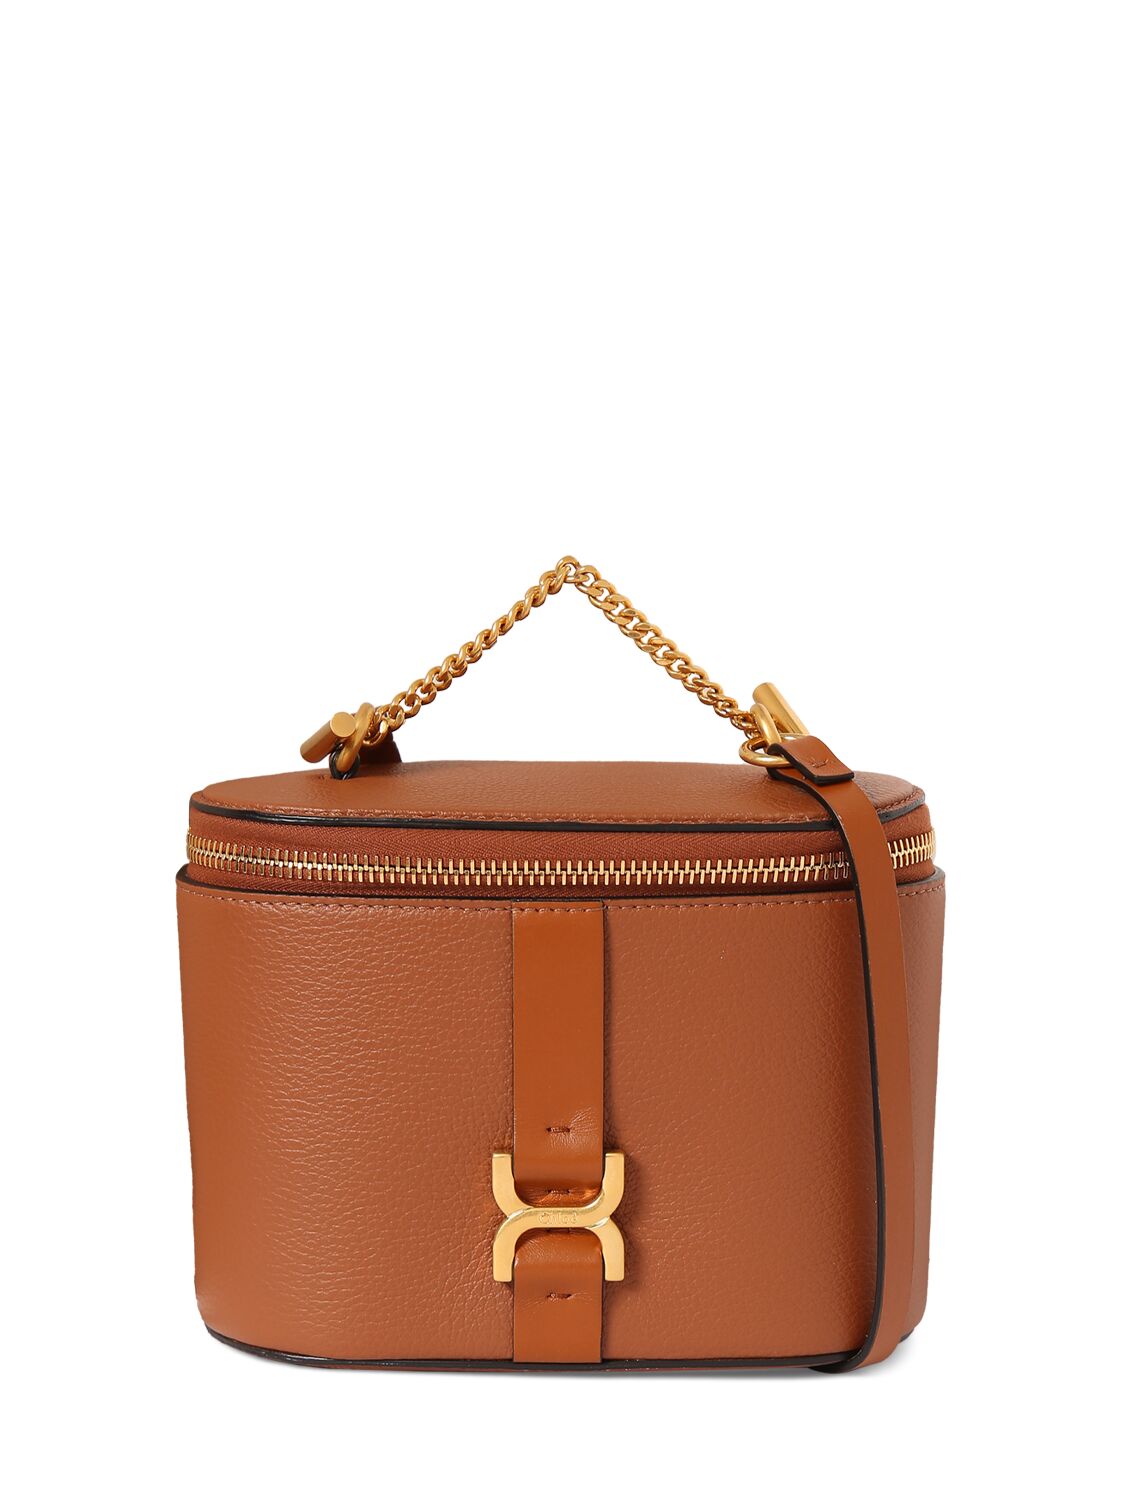 Chloé Marcie Constructed Leather Shoulder Bag In Tan